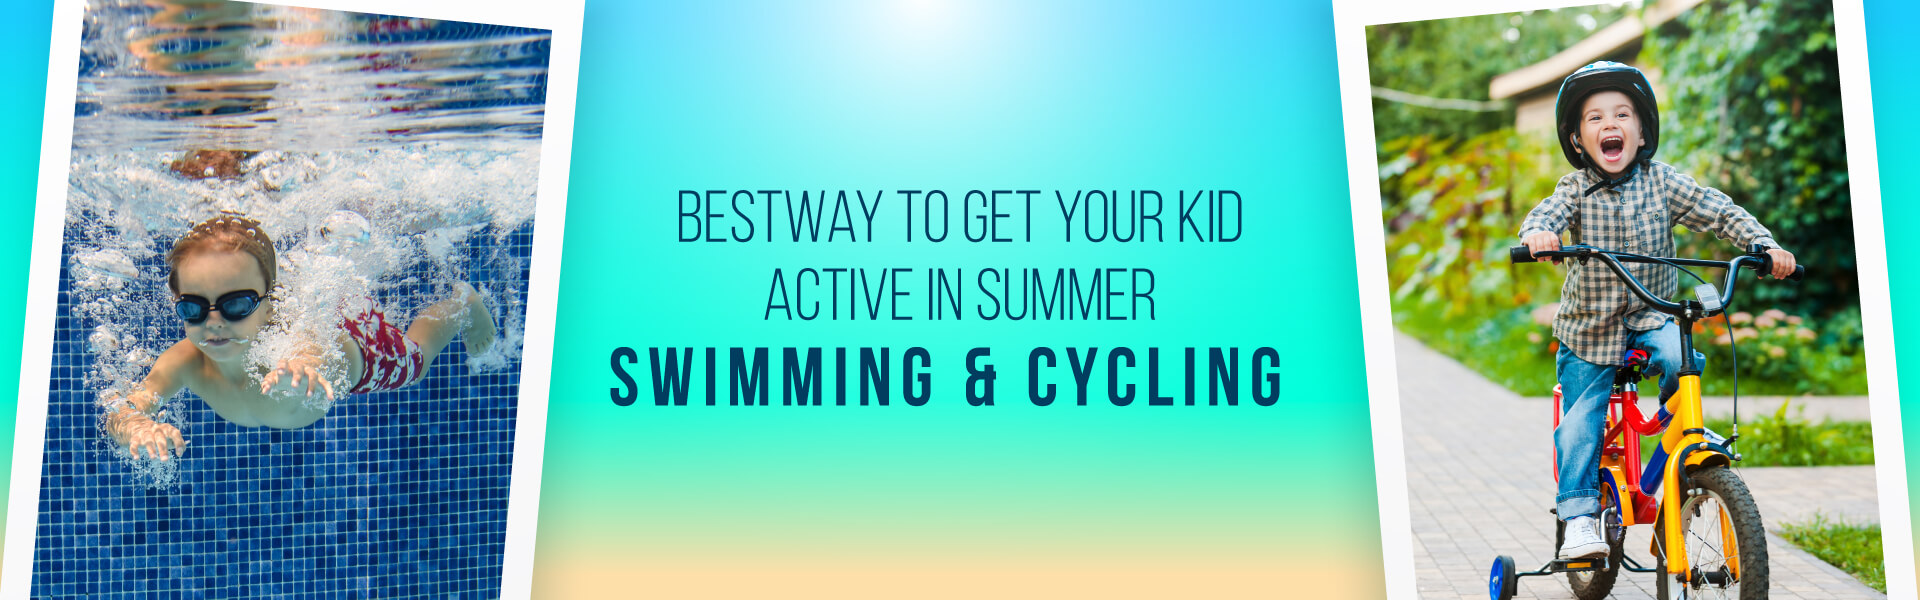 Bestway to get your kid active in summer Swimming - Cycling